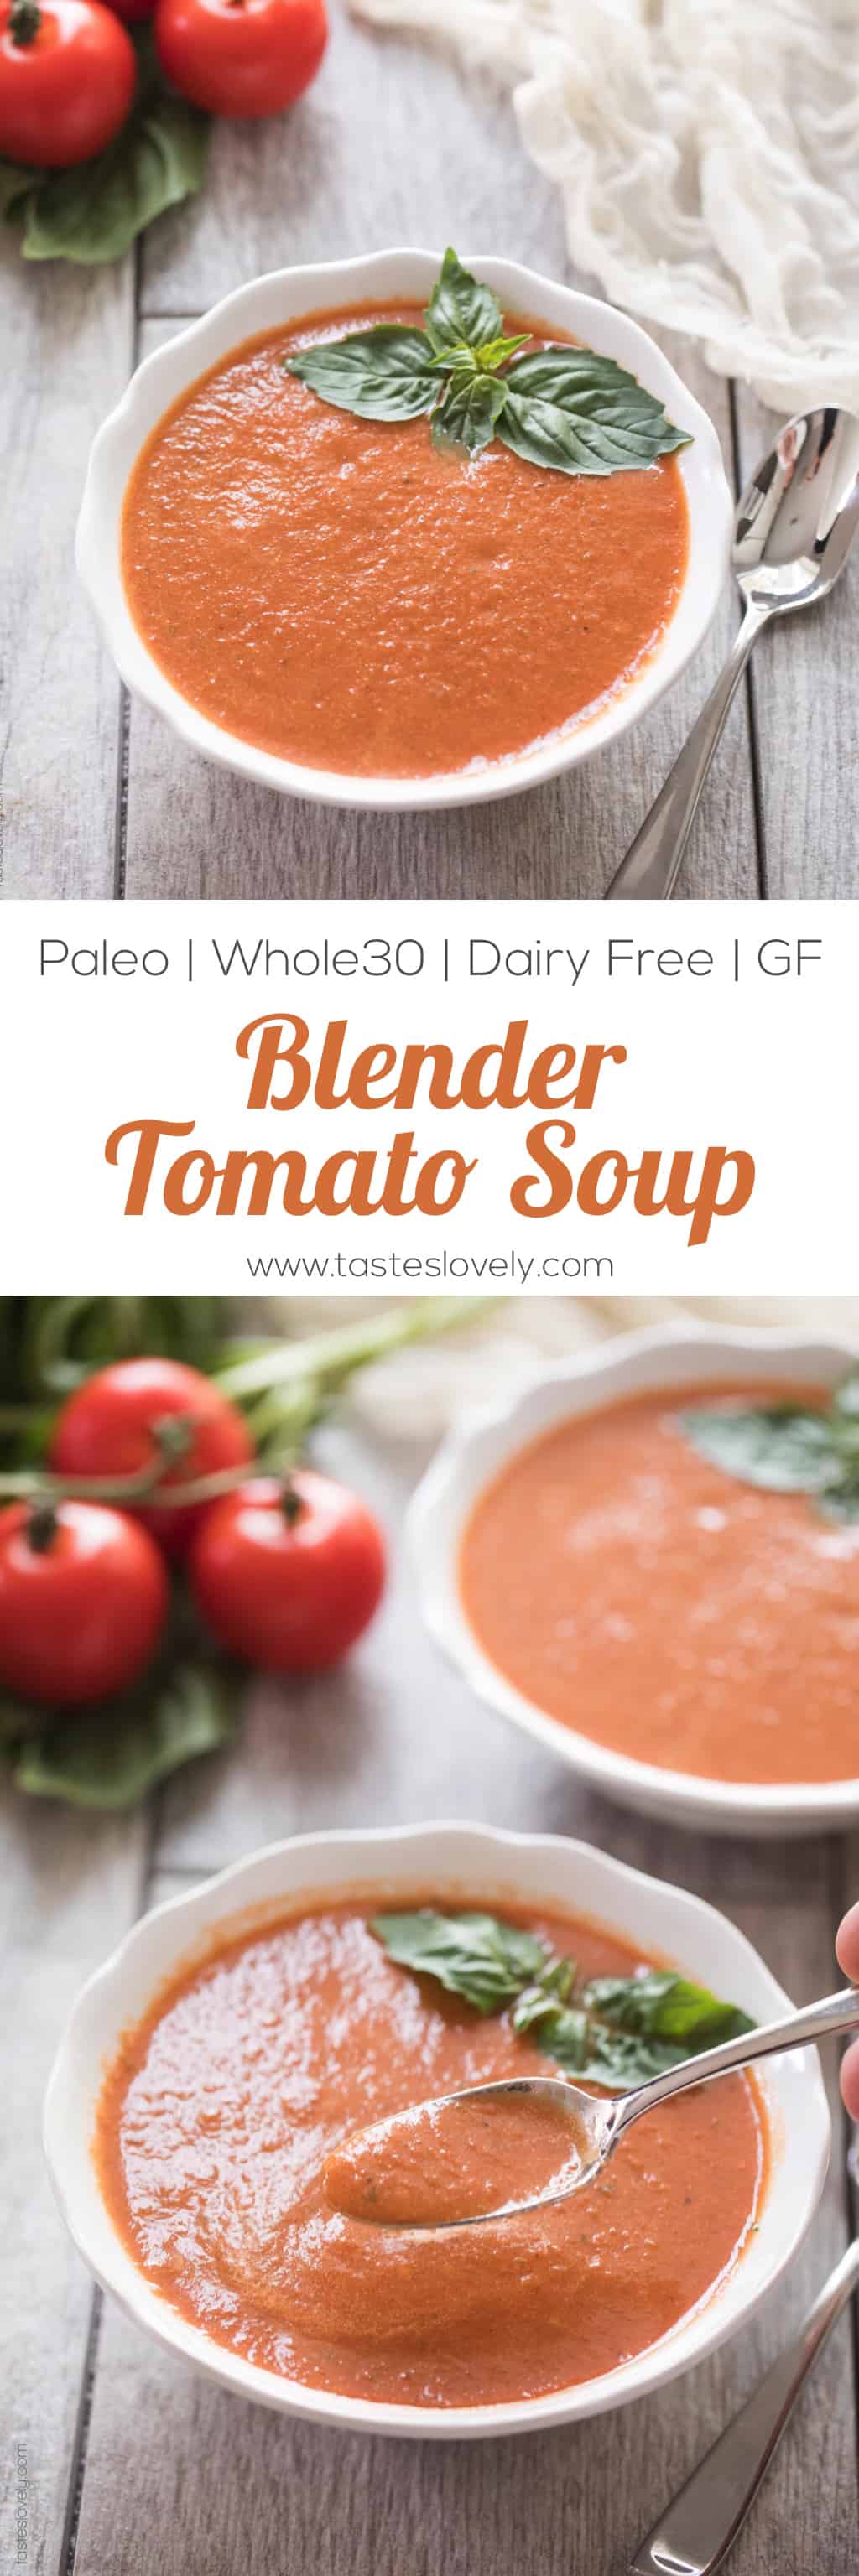 Paleo & Whole30 Tomato Basil Soup - made with canned tomatoes and in the blender, ready in 15 minutes! (dairy free, gluten free, sugar free)